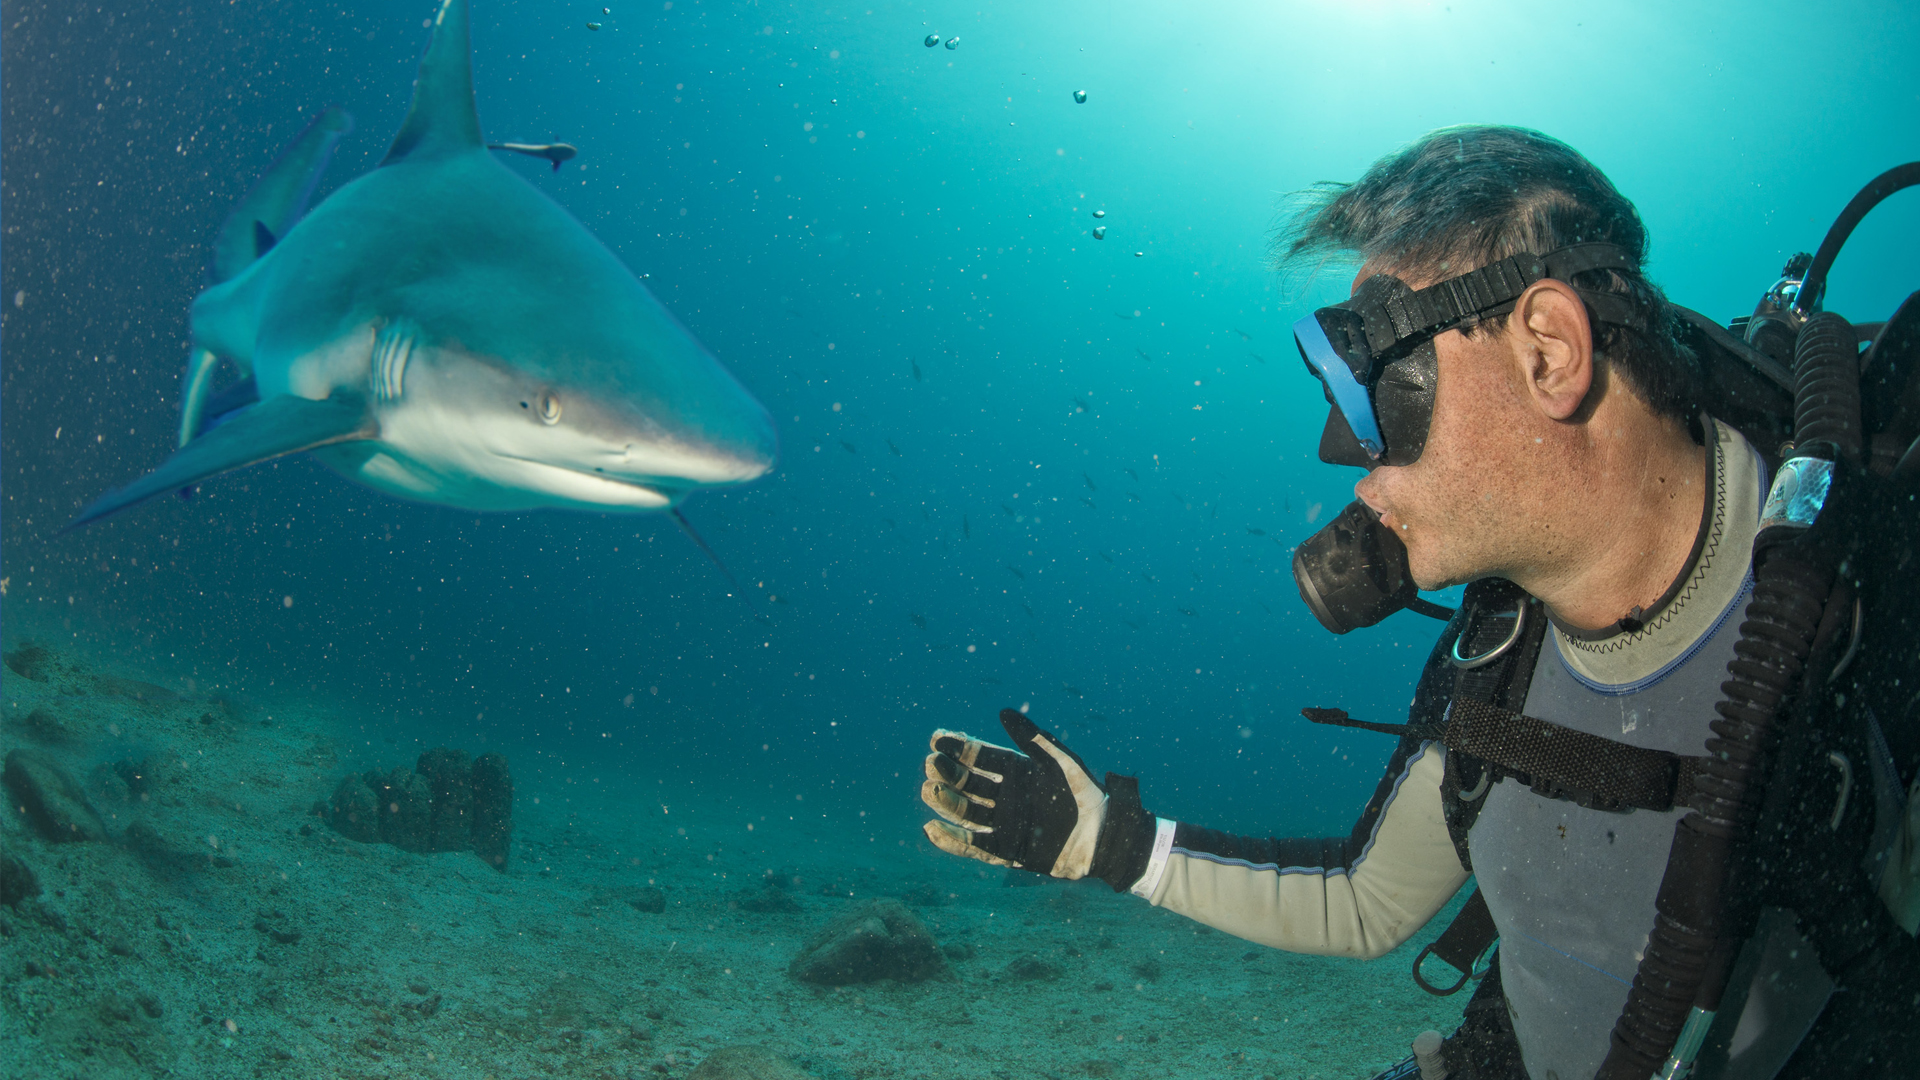 Would You Stick Your Hand Into A Shark’s Mouth?